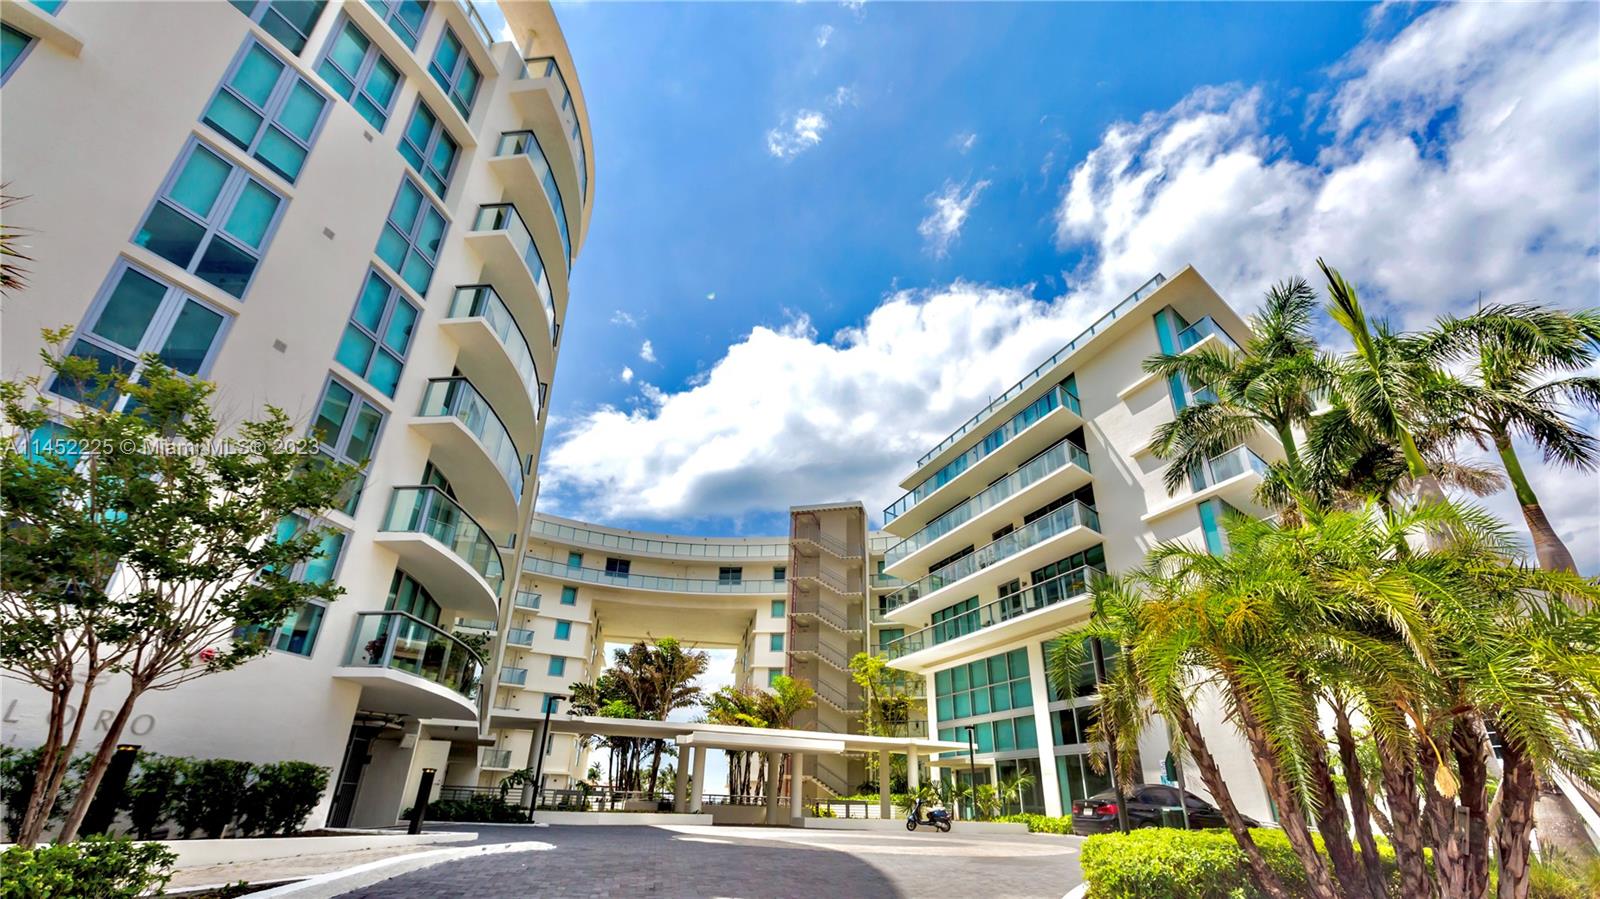 Beautiful, Bright and Spacious 1 bedroom 1.5 Baths unit, located in the midst of all the attractions Miami Beach has to offer. Italian Crafted cabinetry, open kitchen. The beach is minutes away. The building features 24/7 concierge and valet parking, pool, jacuzzi, sauna, gym, library/business center and a rooftop terrace.